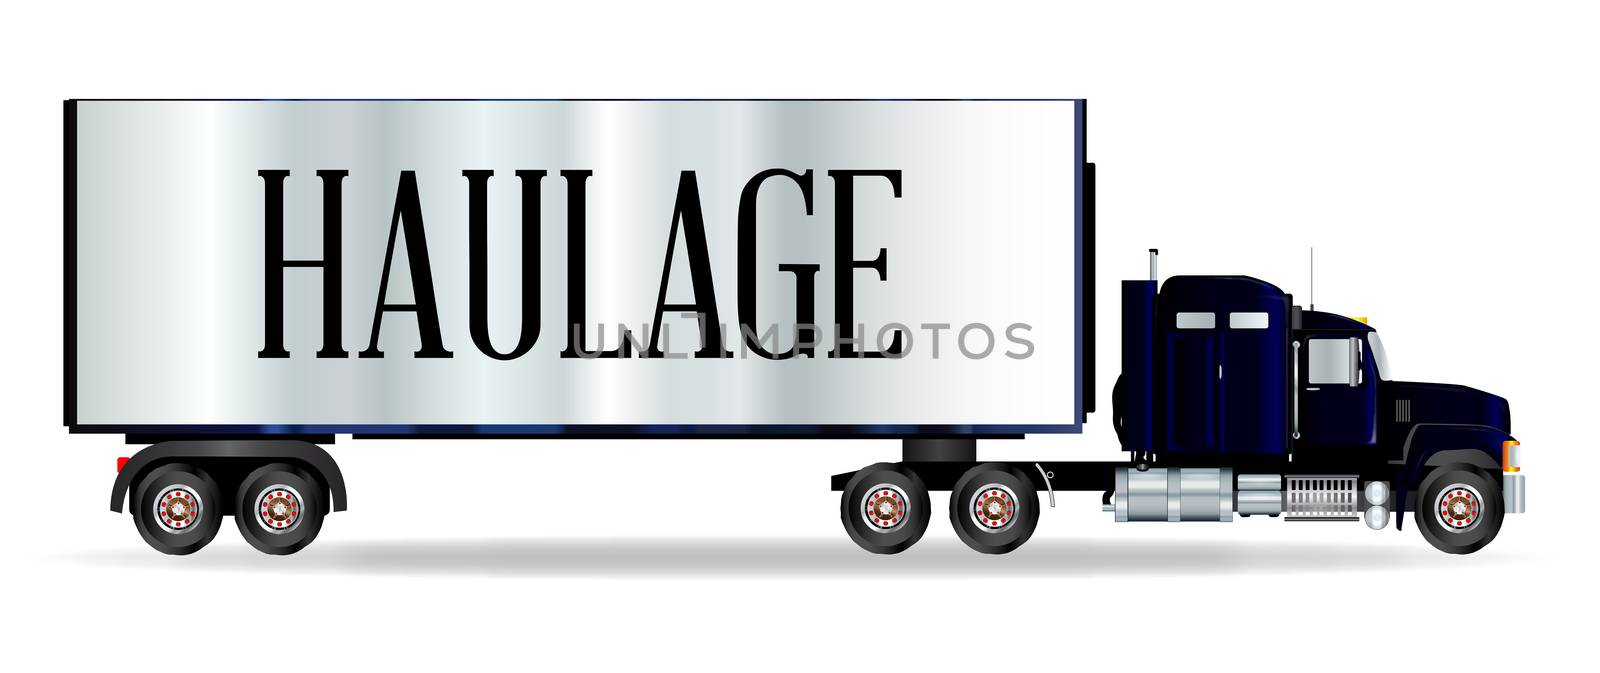 The front end of a large lorry over a white background with Haulage inscription